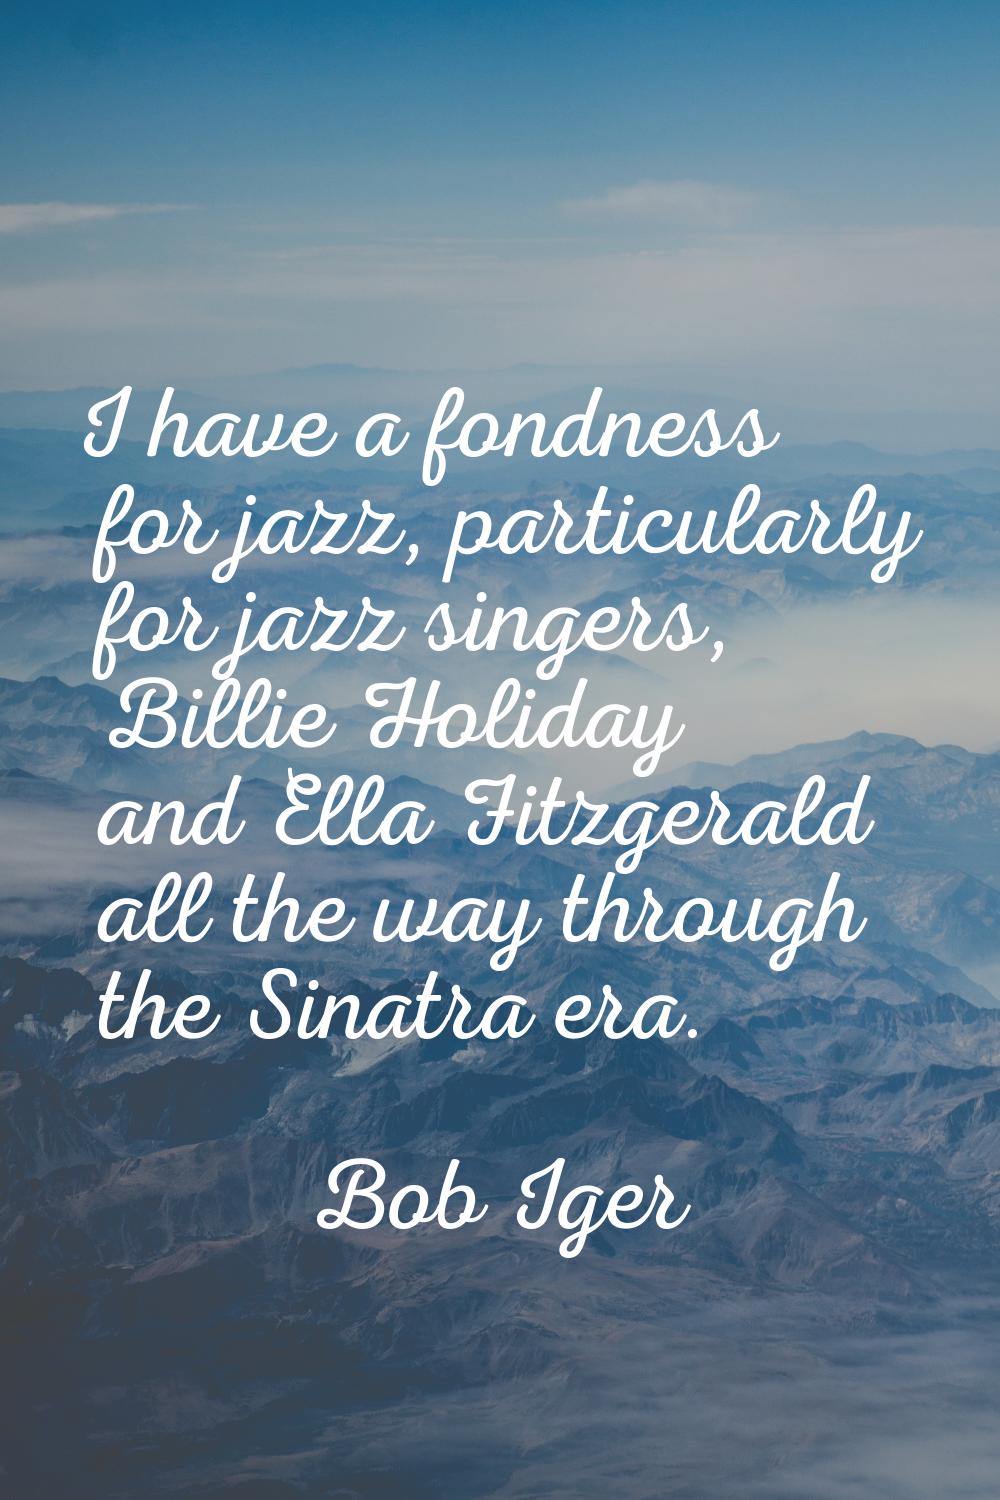 I have a fondness for jazz, particularly for jazz singers, Billie Holiday and Ella Fitzgerald all t